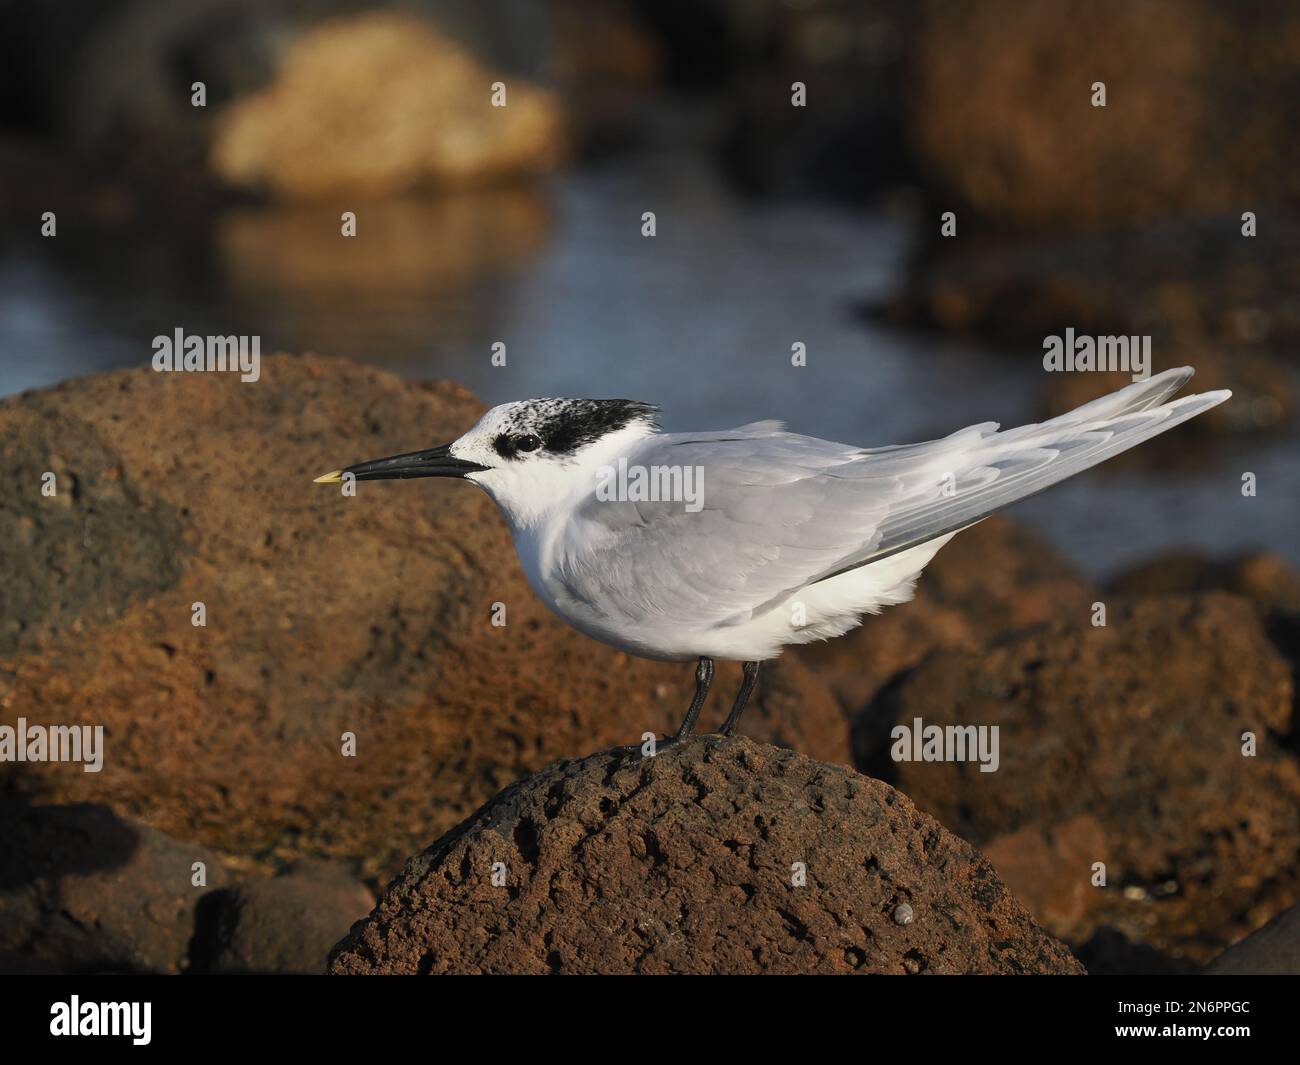 A small flock of sandwich terns Winter in Costa Teguise, it appears their numbers may increase as migration commences. Stock Photo